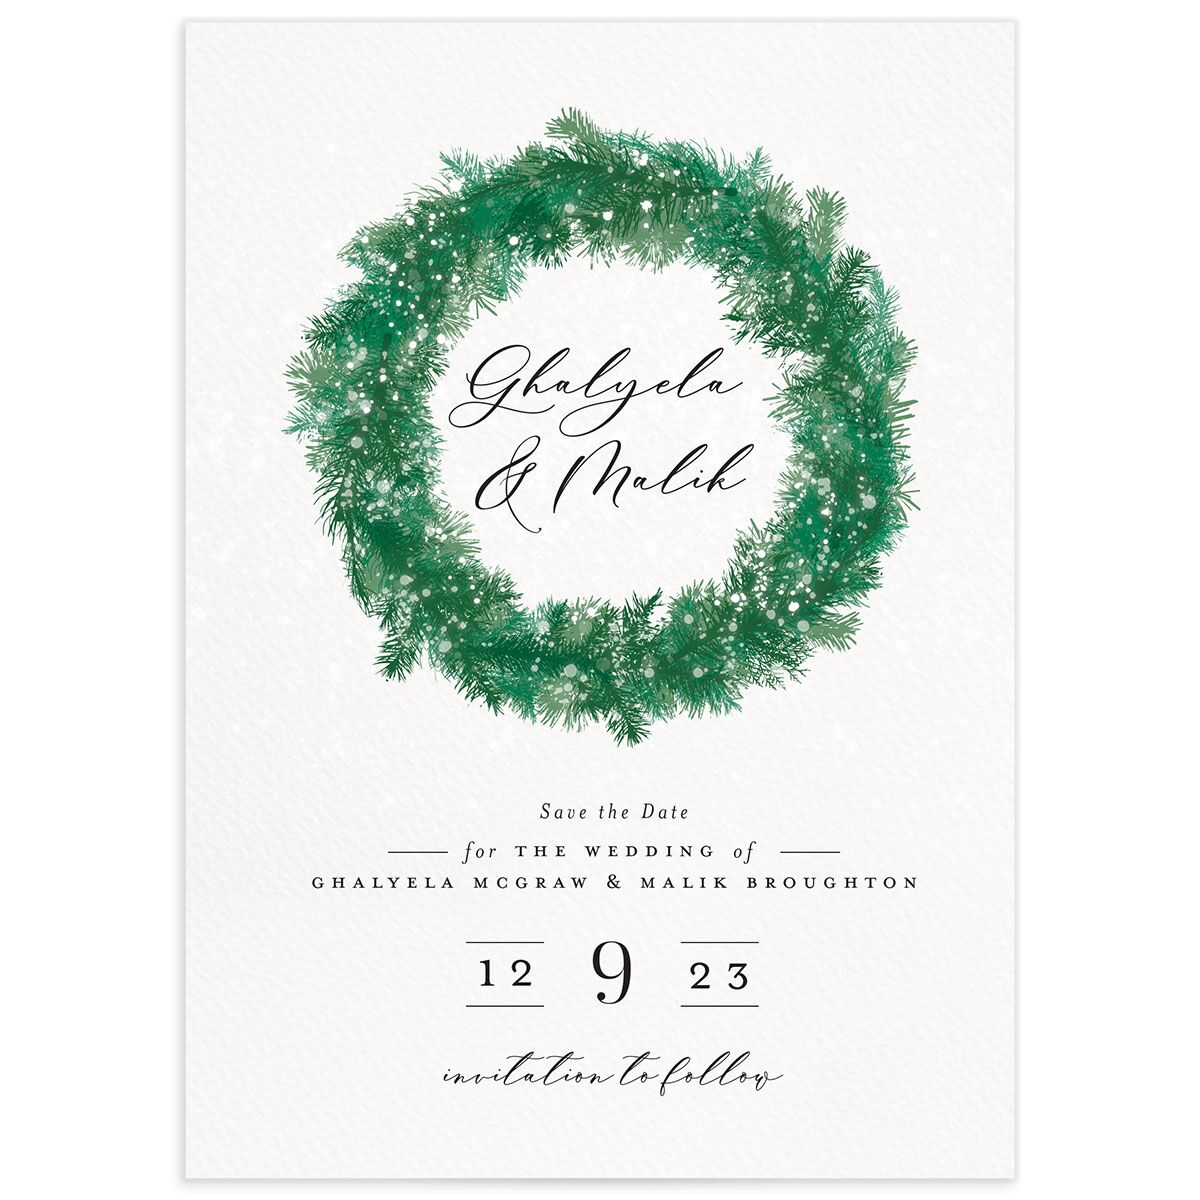 Snowy Wreath Save The Date Cards